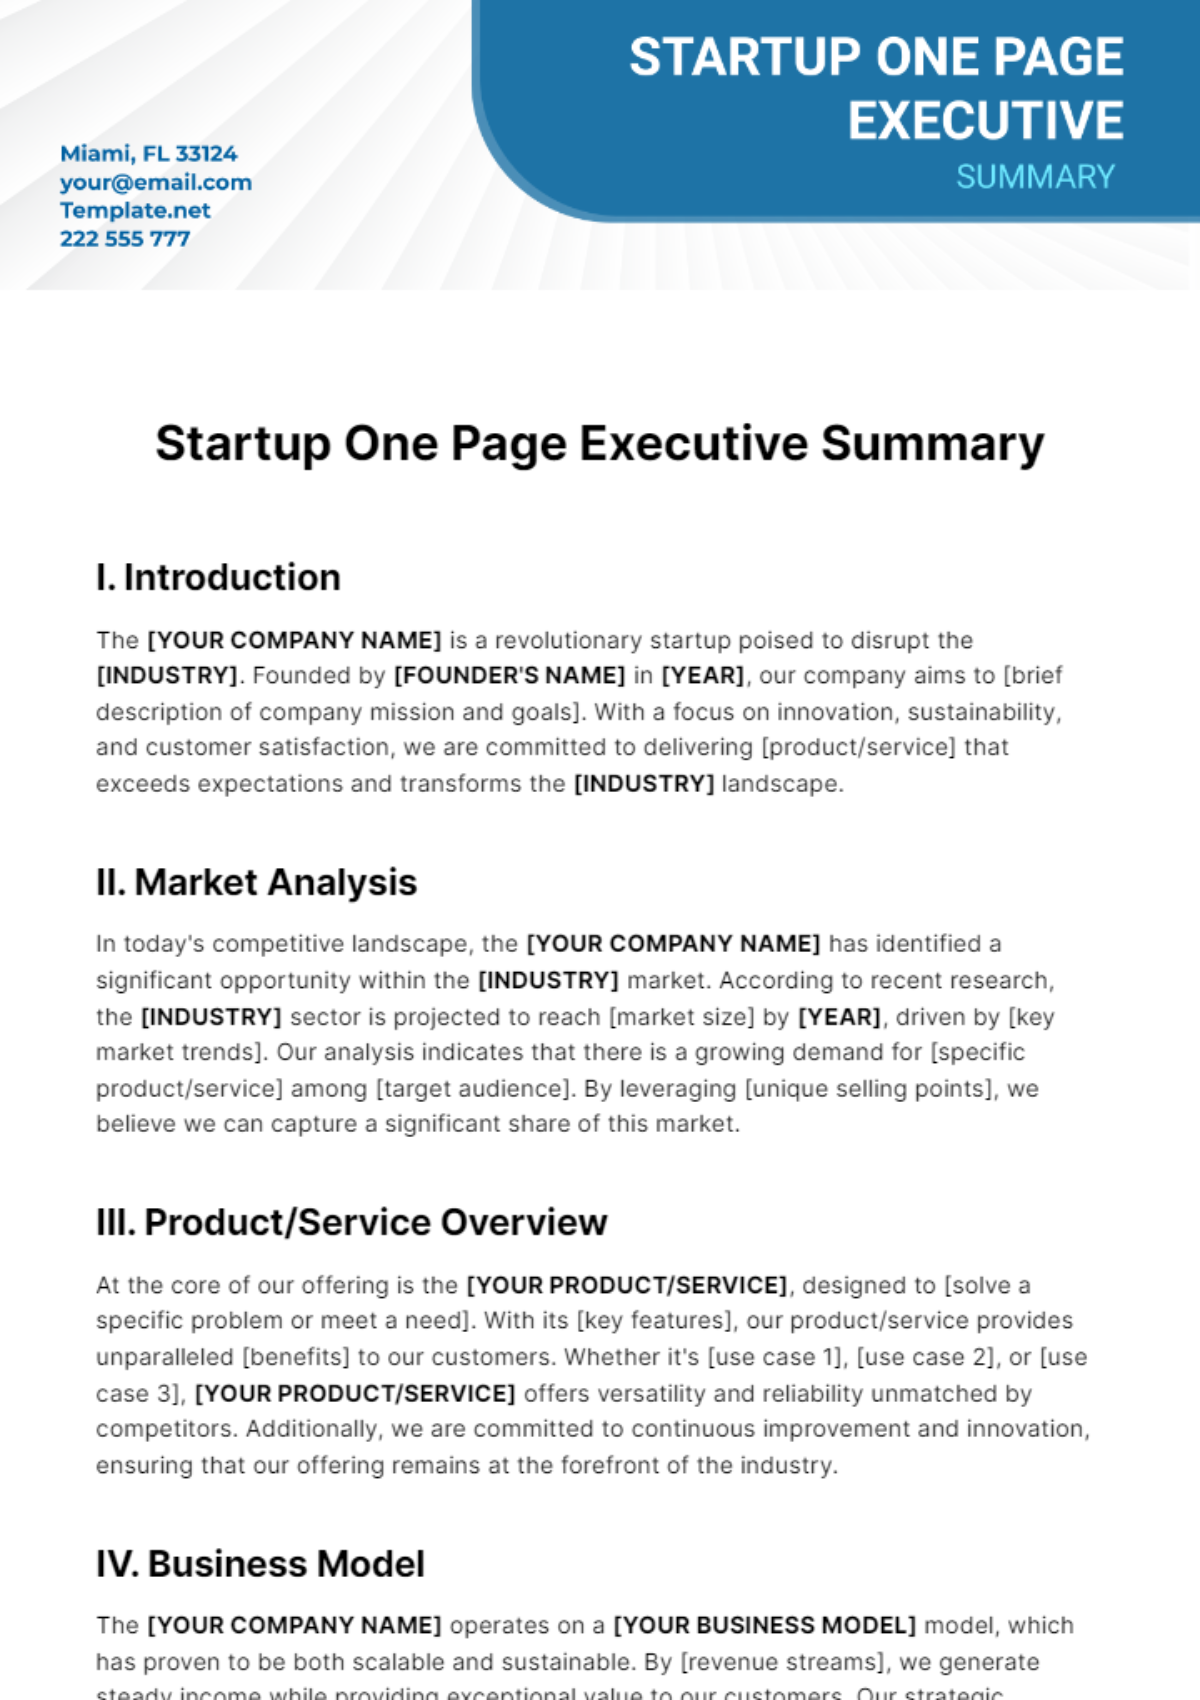 Startup One Page Executive Summary Template